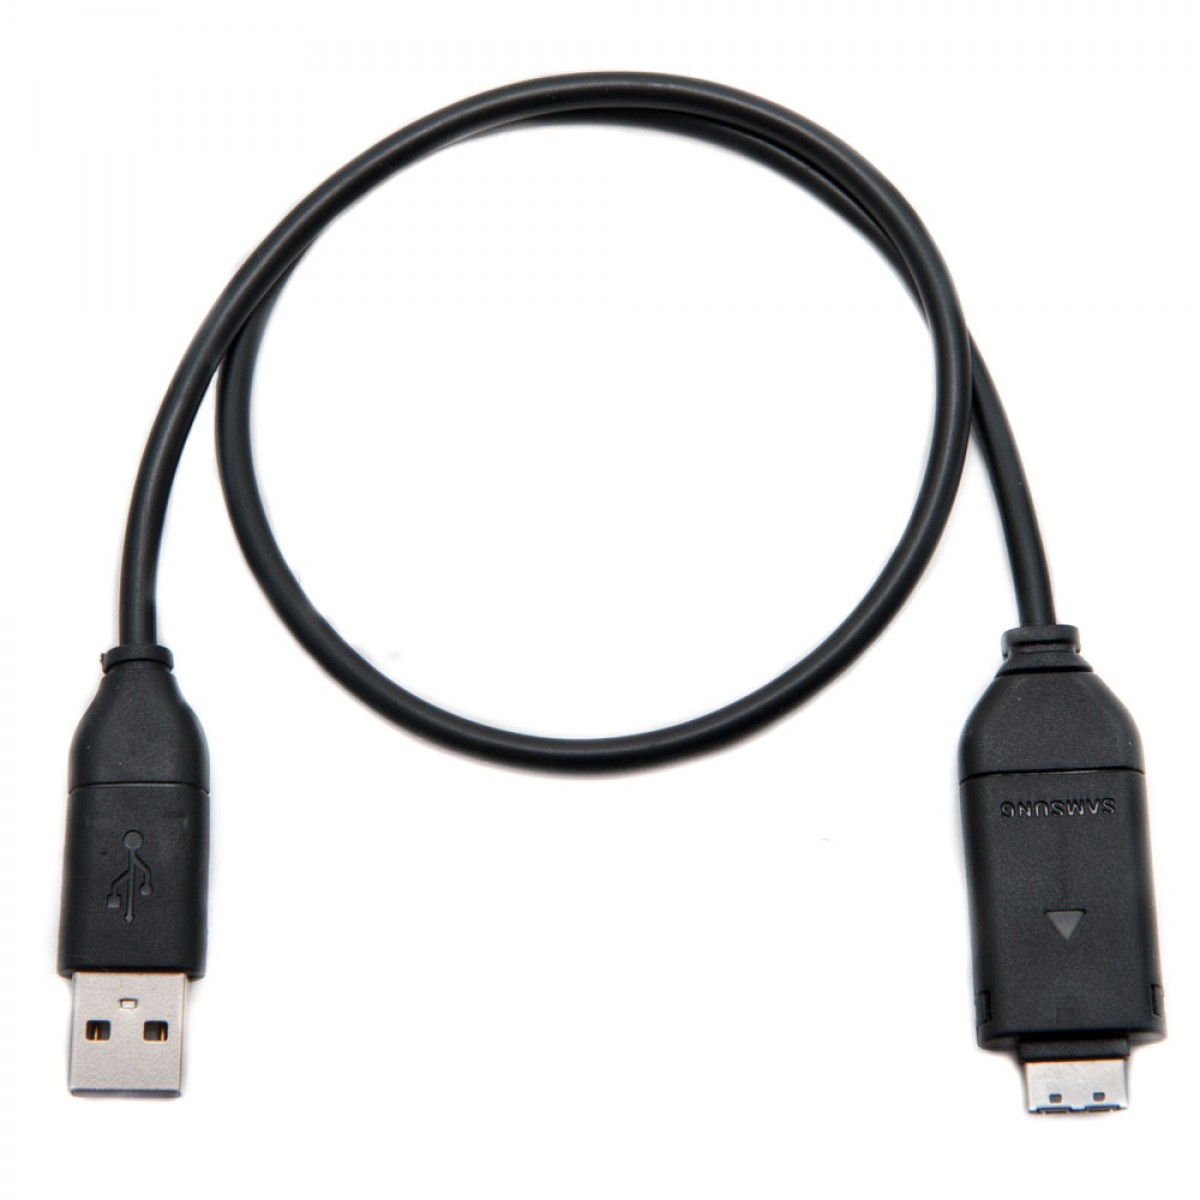 Samsung ES65 Digital Camera Camcoder USB Cable Lead Cord 1m to Computer PC  